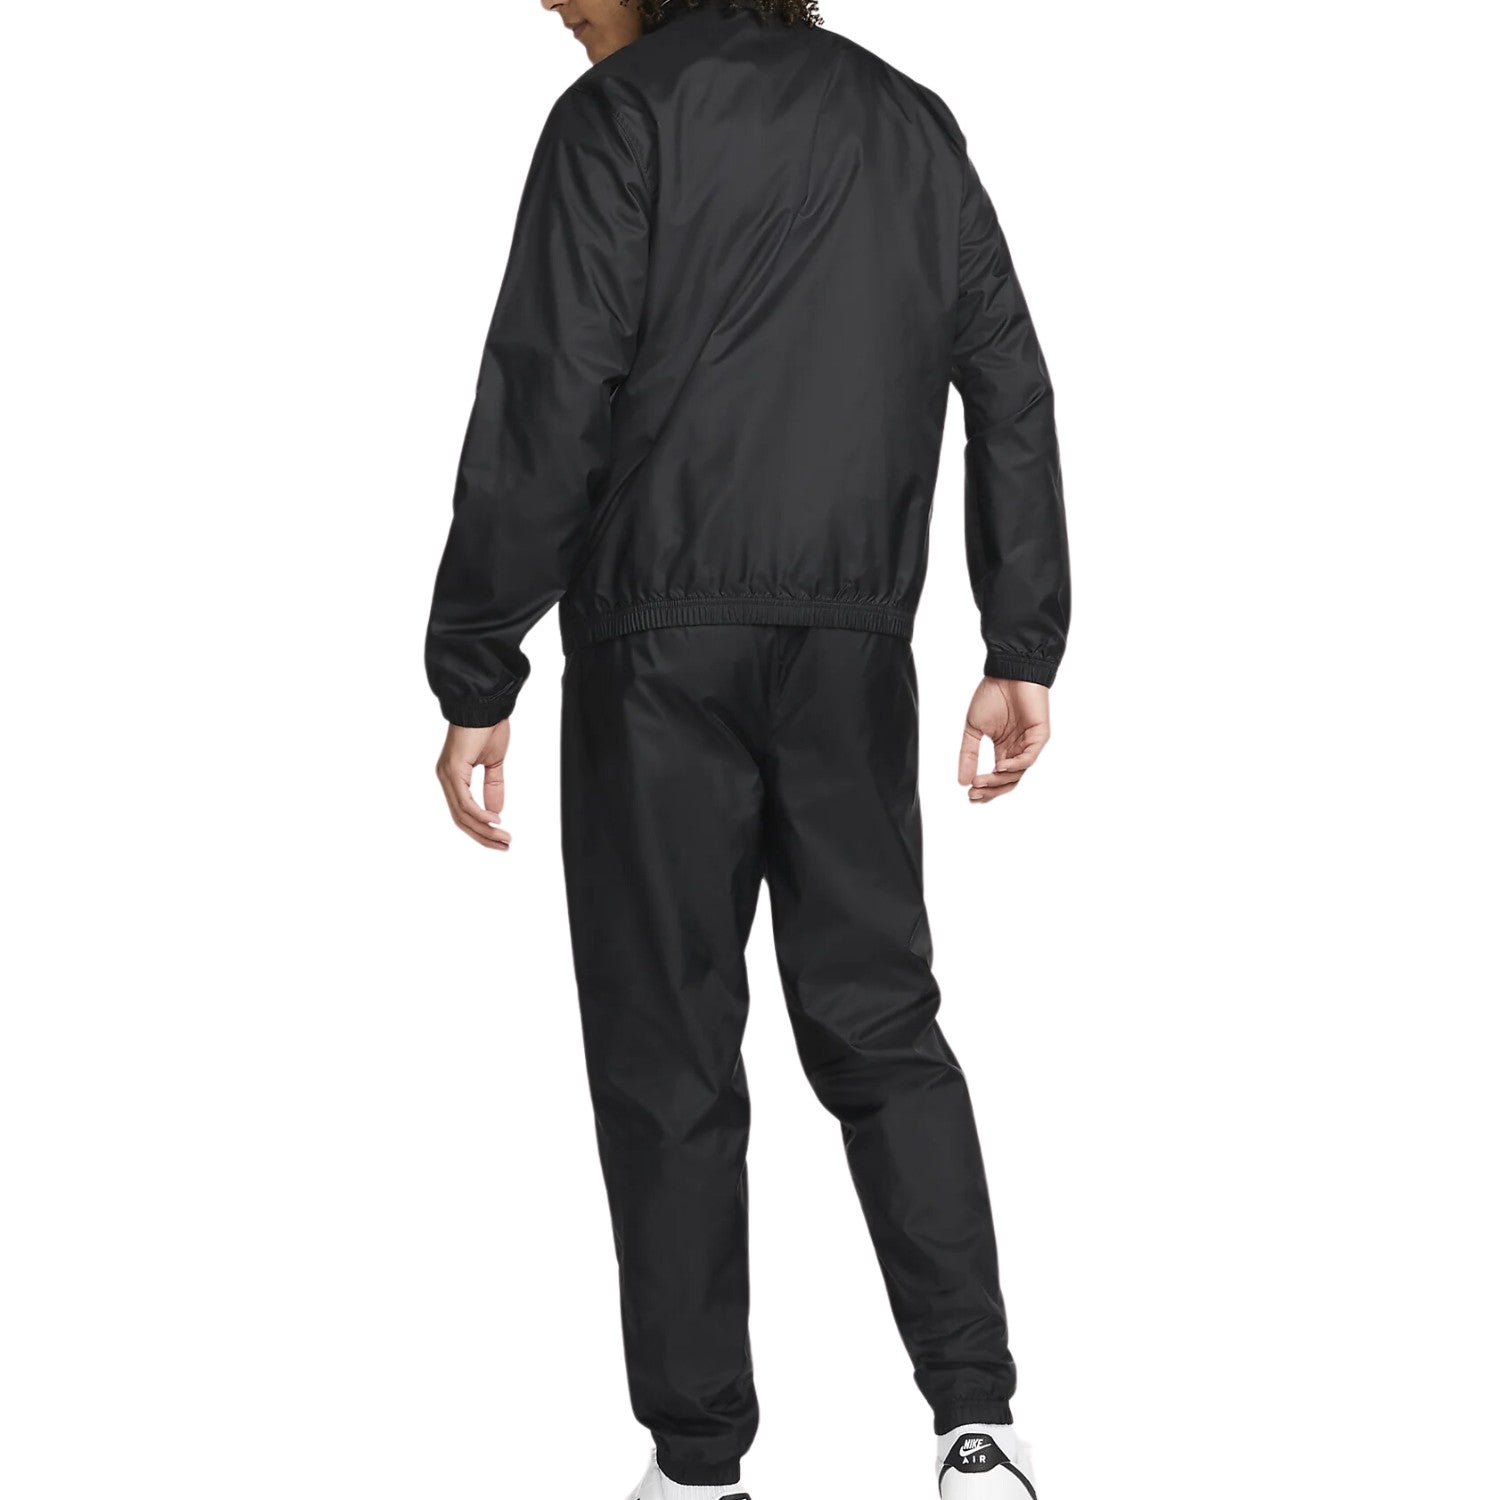 Nike Sportswear Club Men's Lined Woven Tracksuit Set Mens Style : Dr3337